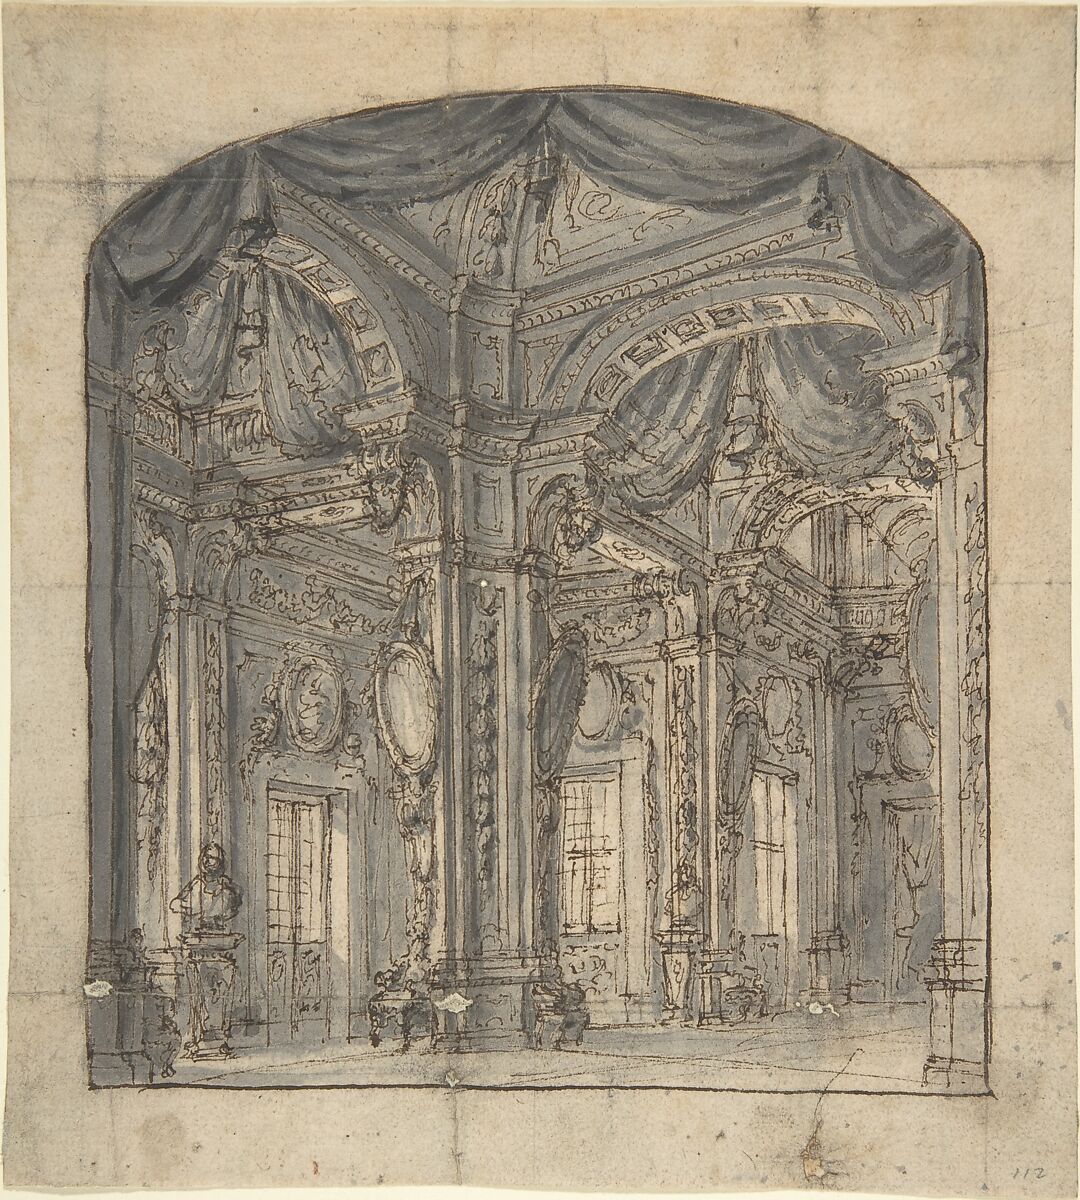 Stage Set of a Room Interior with Receding Perspective, Anonymous, Italian, Piedmontese, 18th century, Pen and brown ink, brush and gray wash 